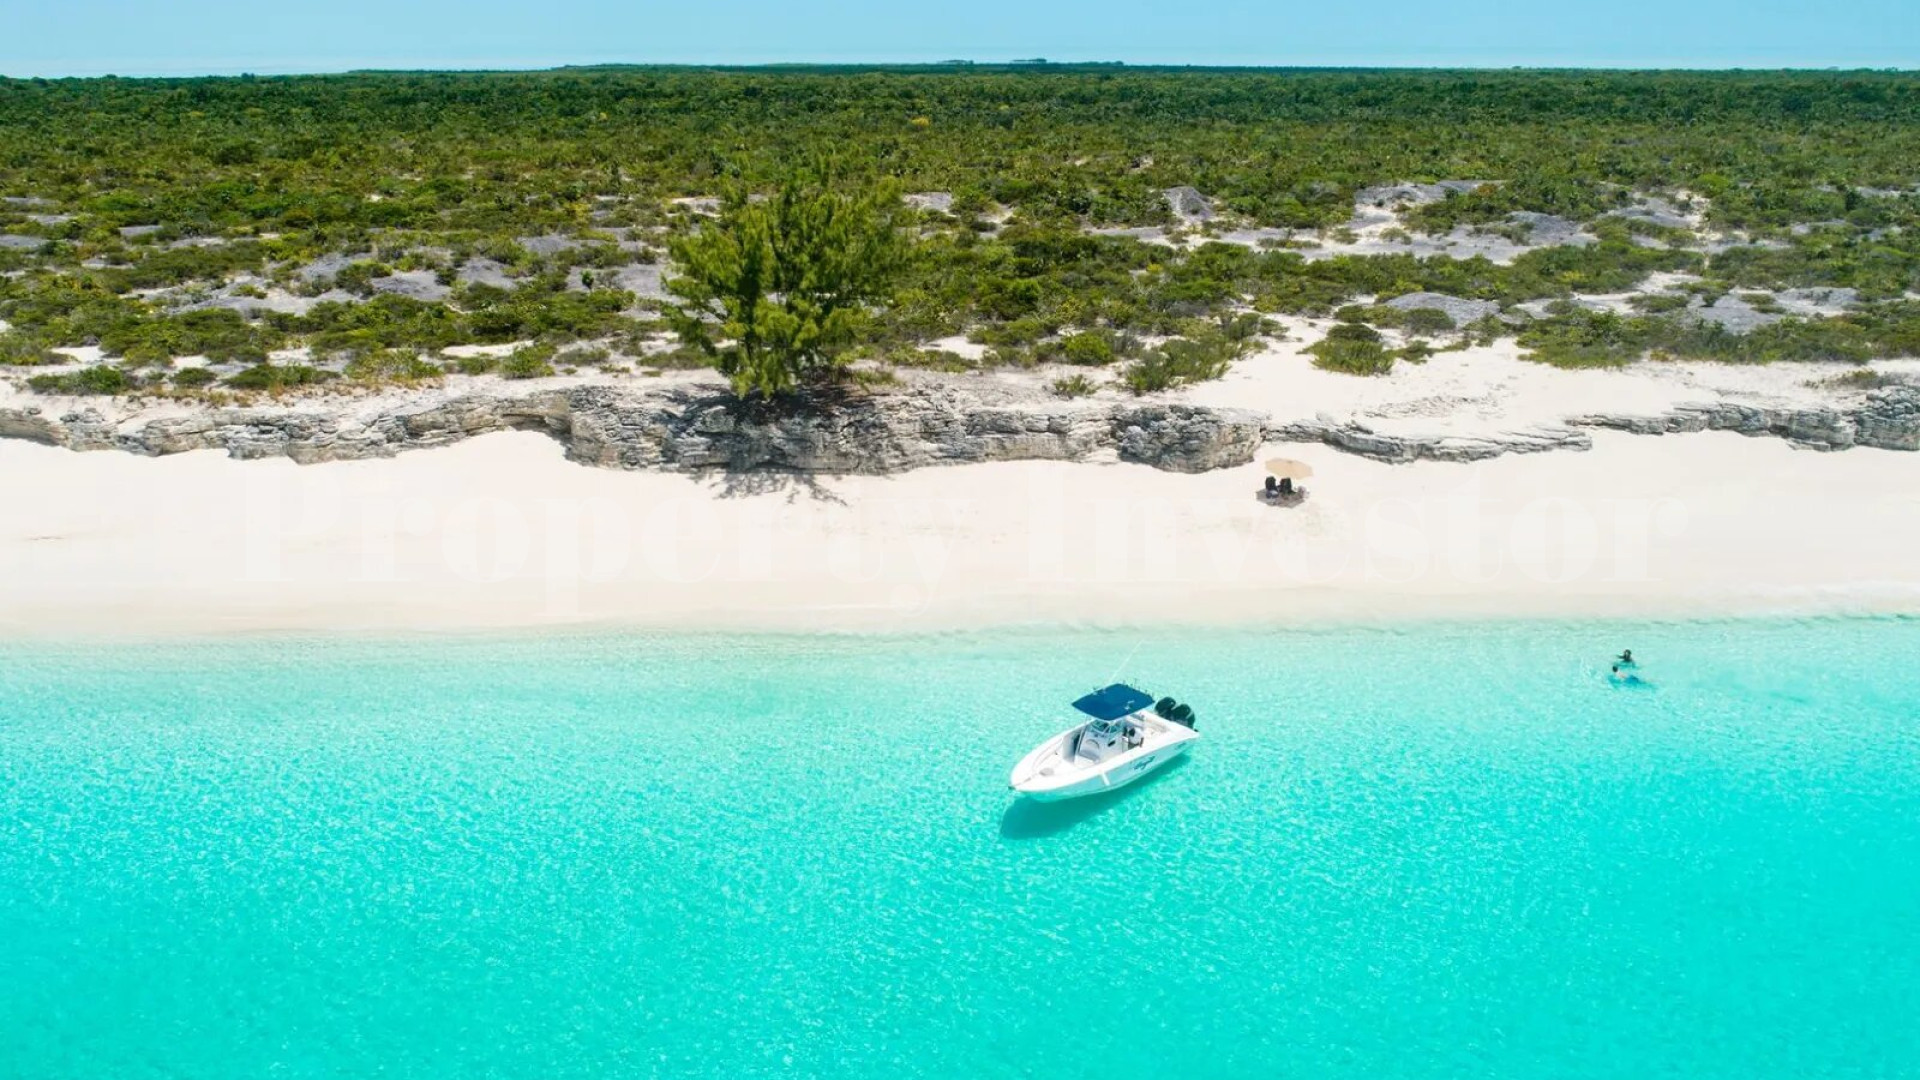 Expansive 174 Hectare Private Island Plot for Commercial Development for Sale in Turks & Caicos